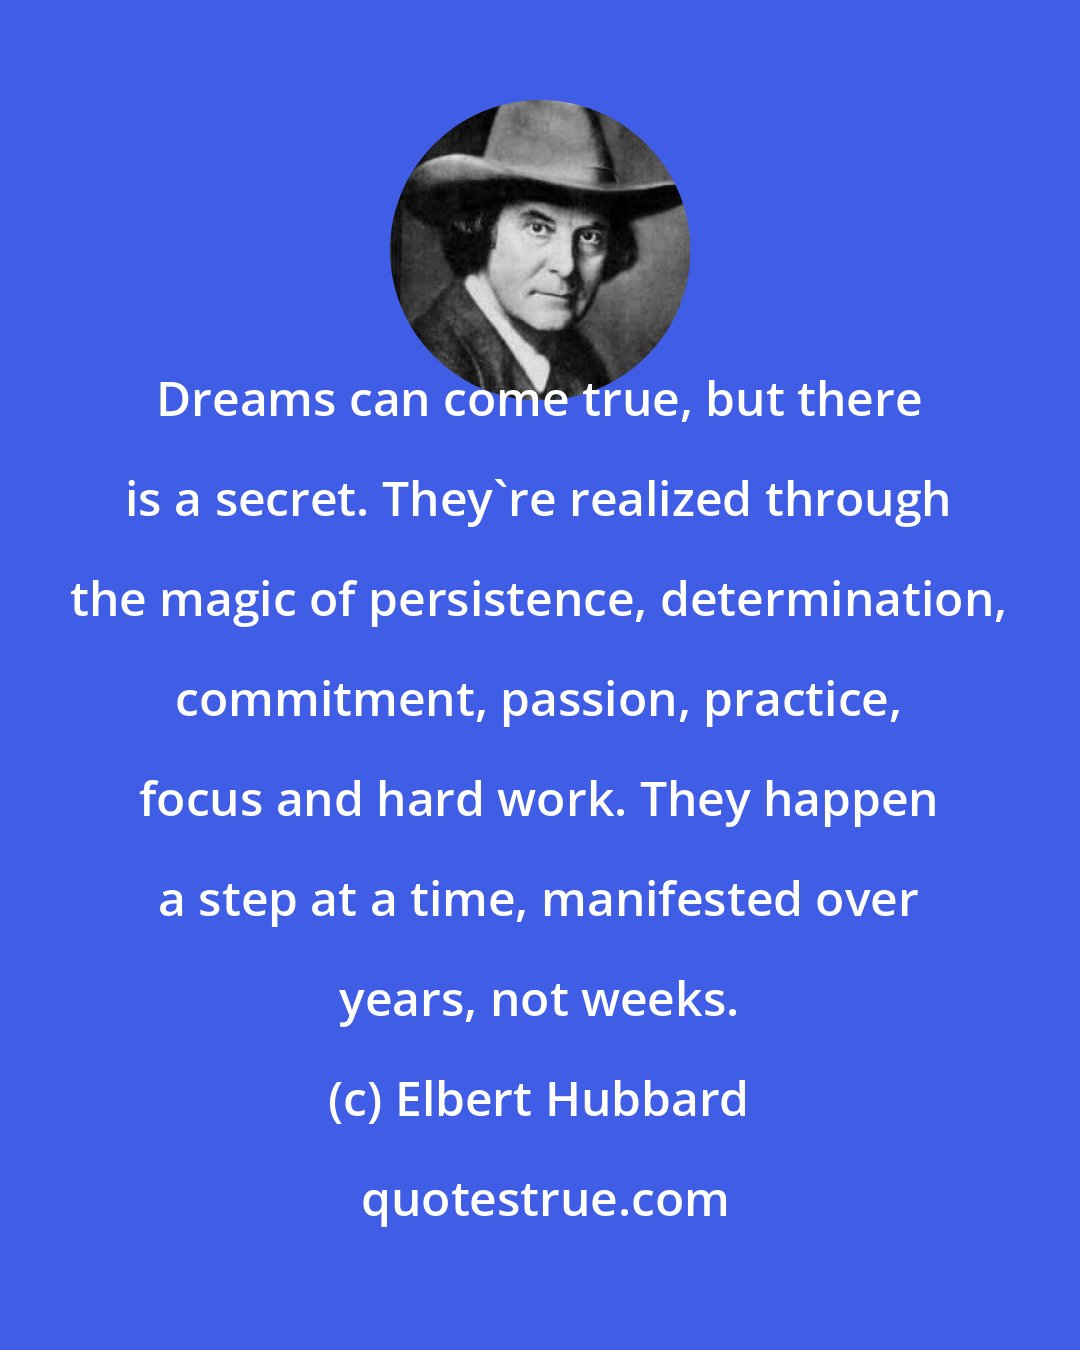 Elbert Hubbard: Dreams can come true, but there is a secret. They're realized through the magic of persistence, determination, commitment, passion, practice, focus and hard work. They happen a step at a time, manifested over years, not weeks.